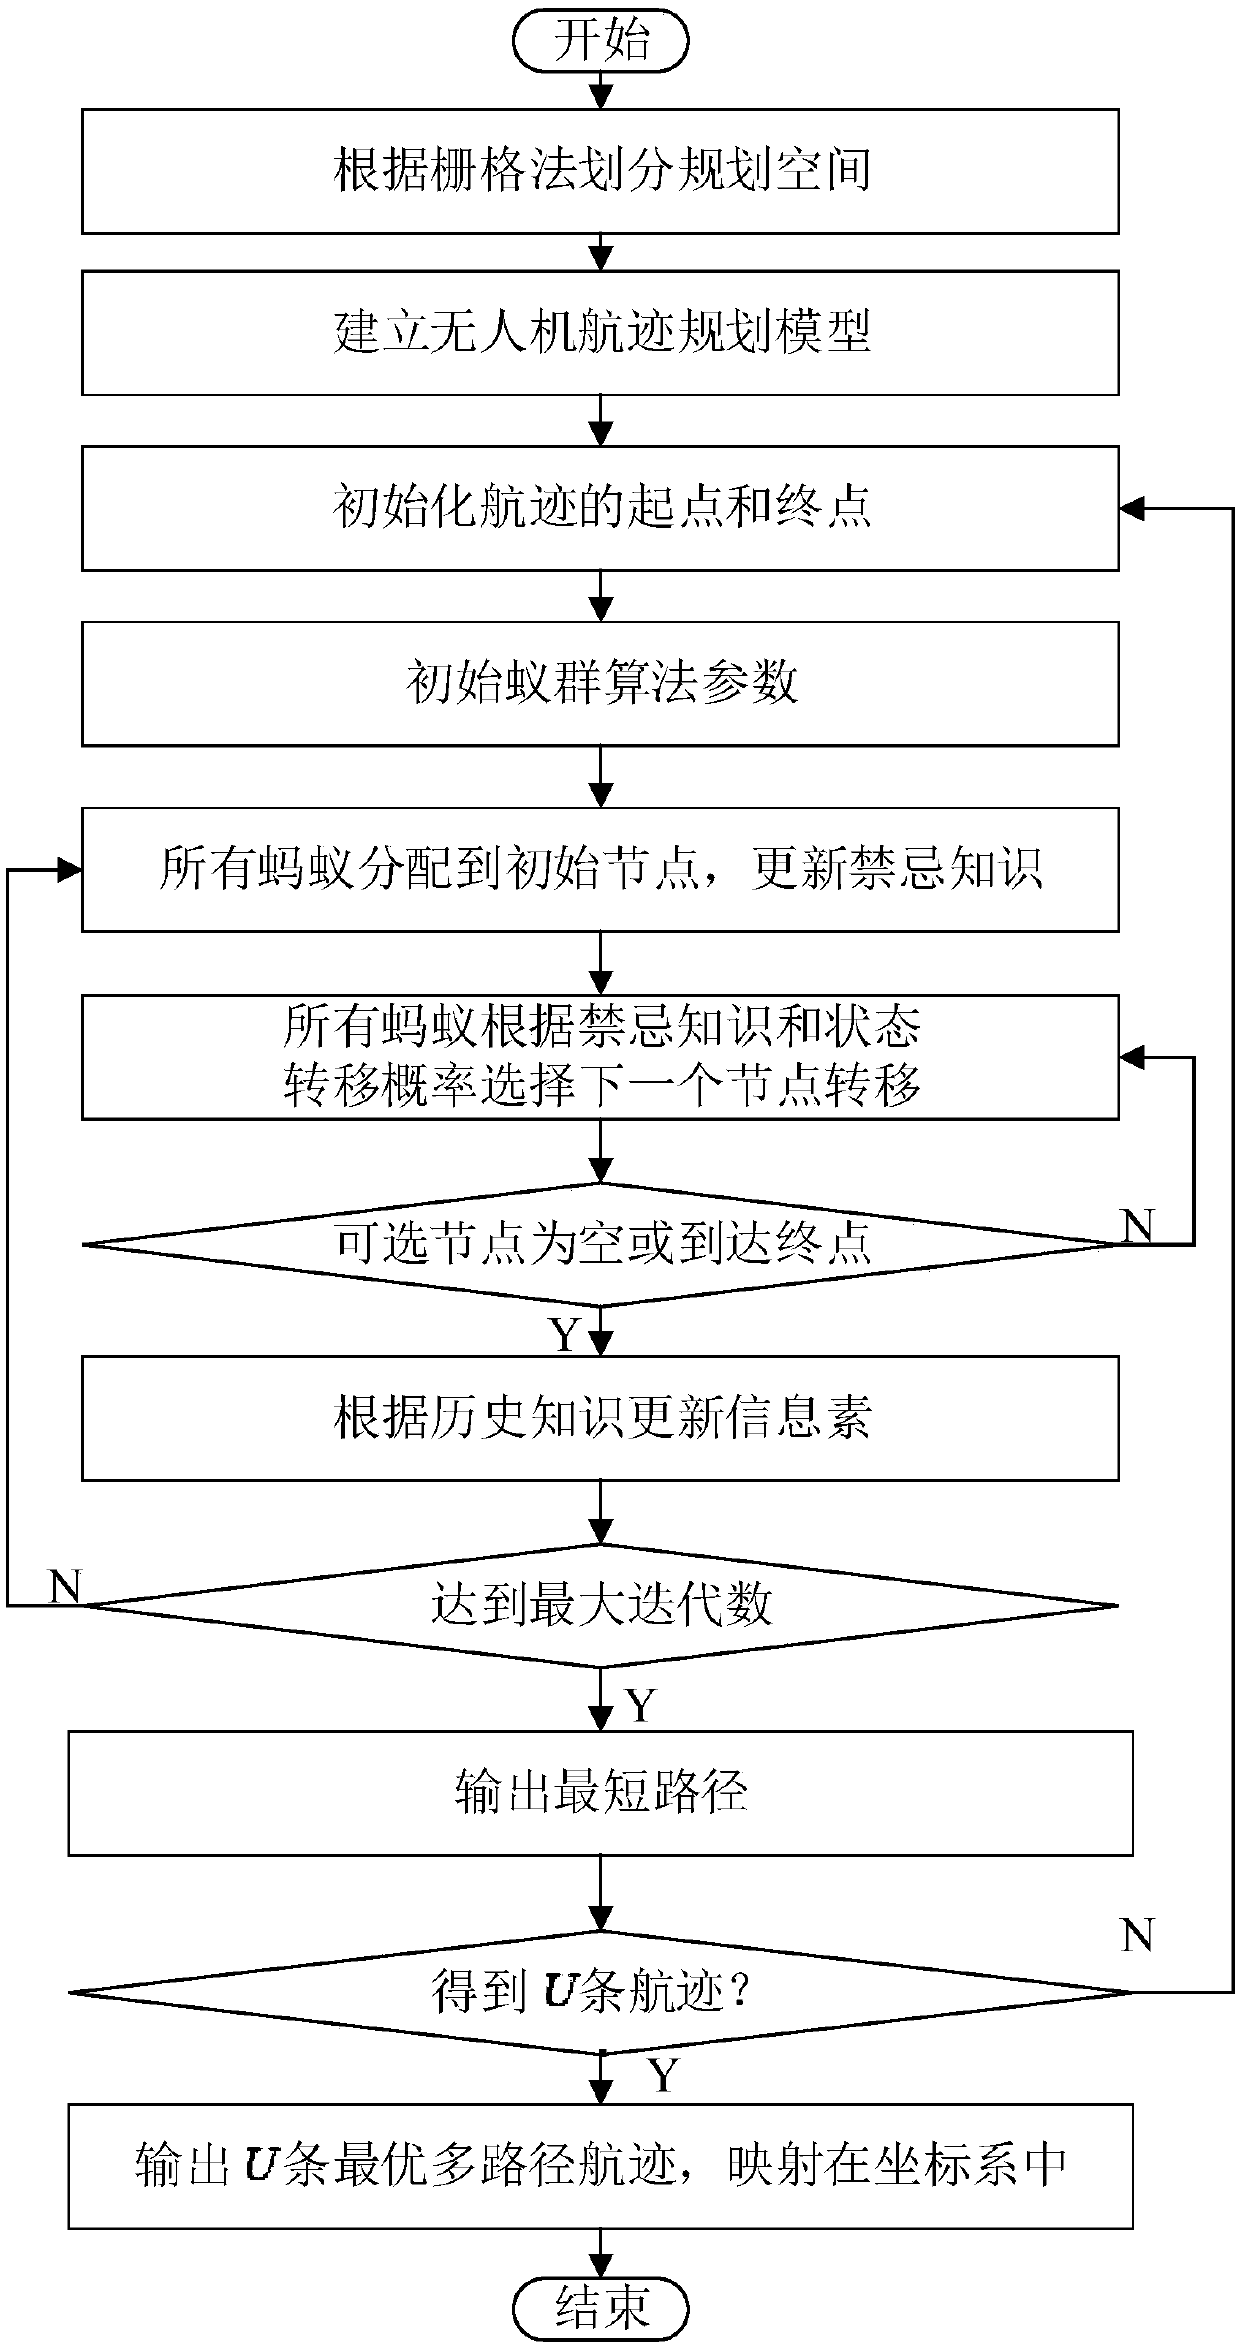 Multi-unmanned aerial vehicle track planning method based on culture ant colony search mechanism